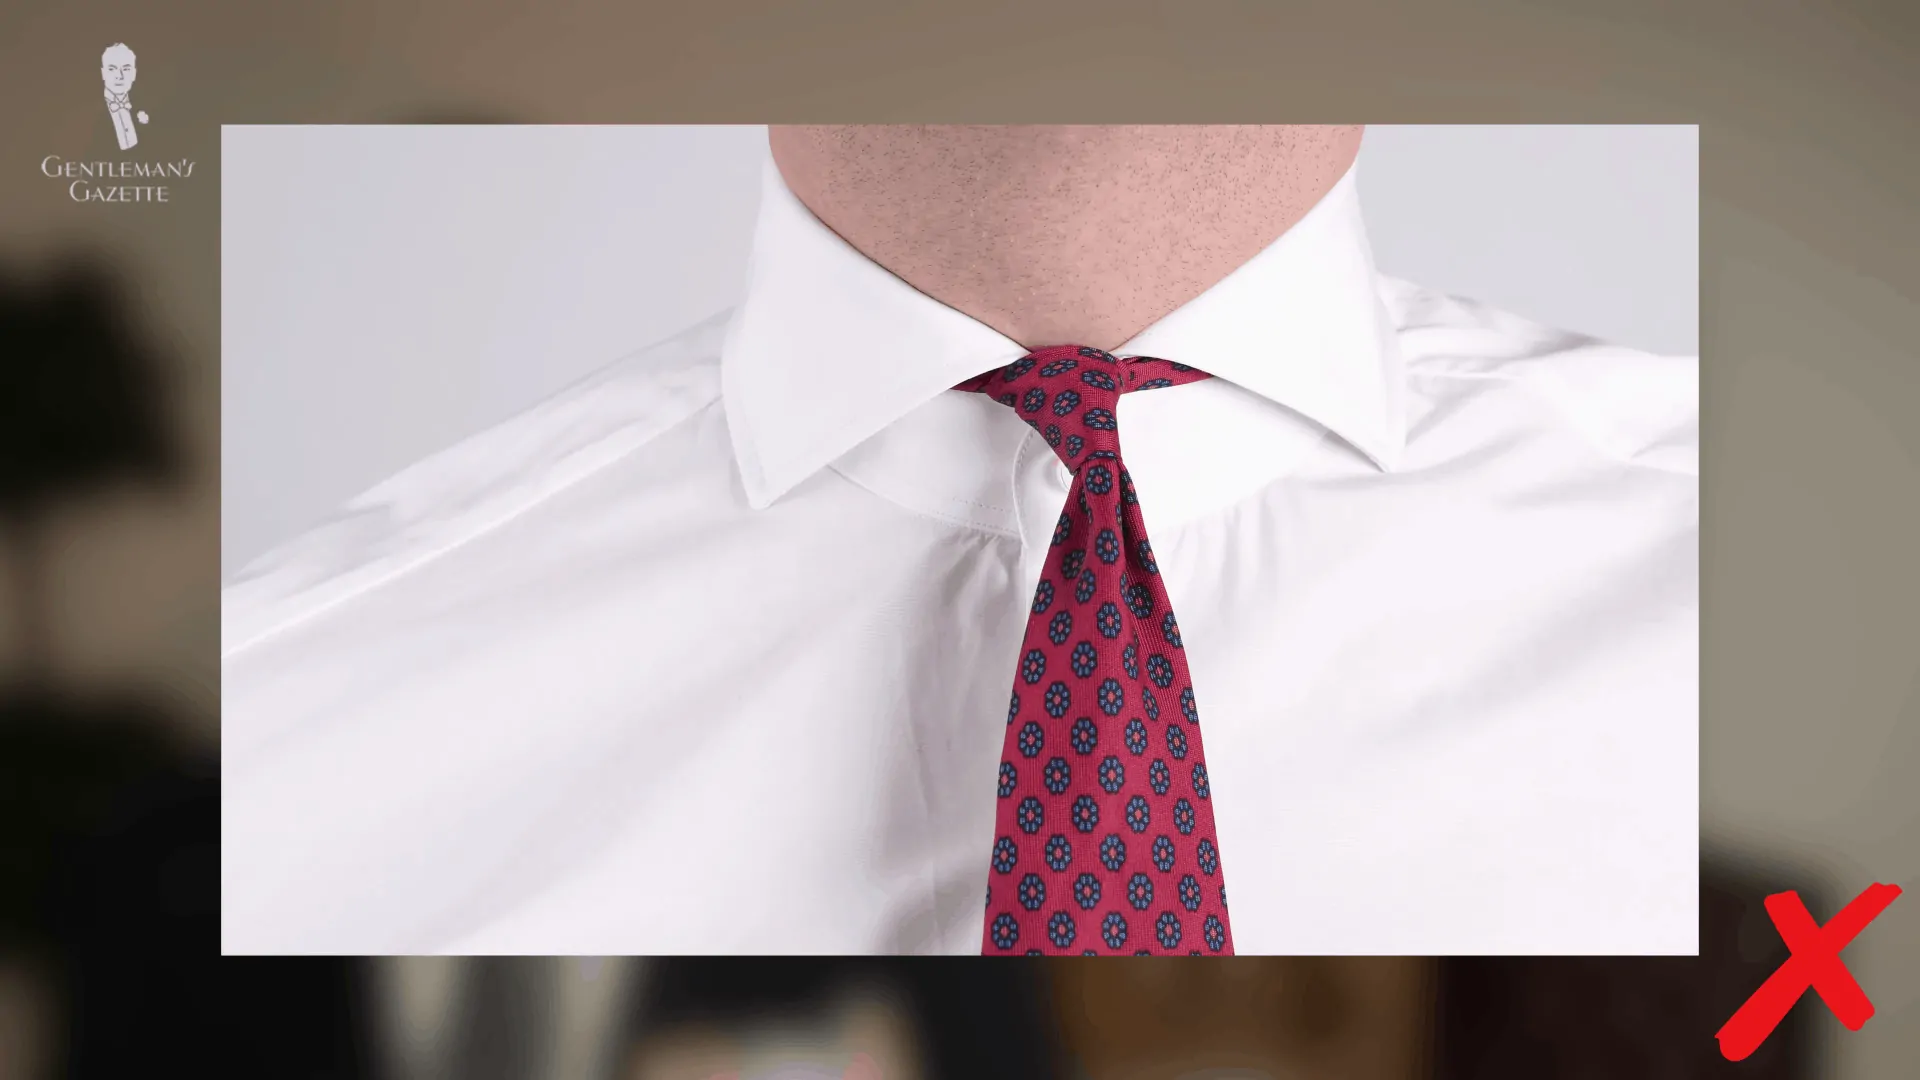 How to Tie a Tie  7 Easy Tie Knots for Any Occasion